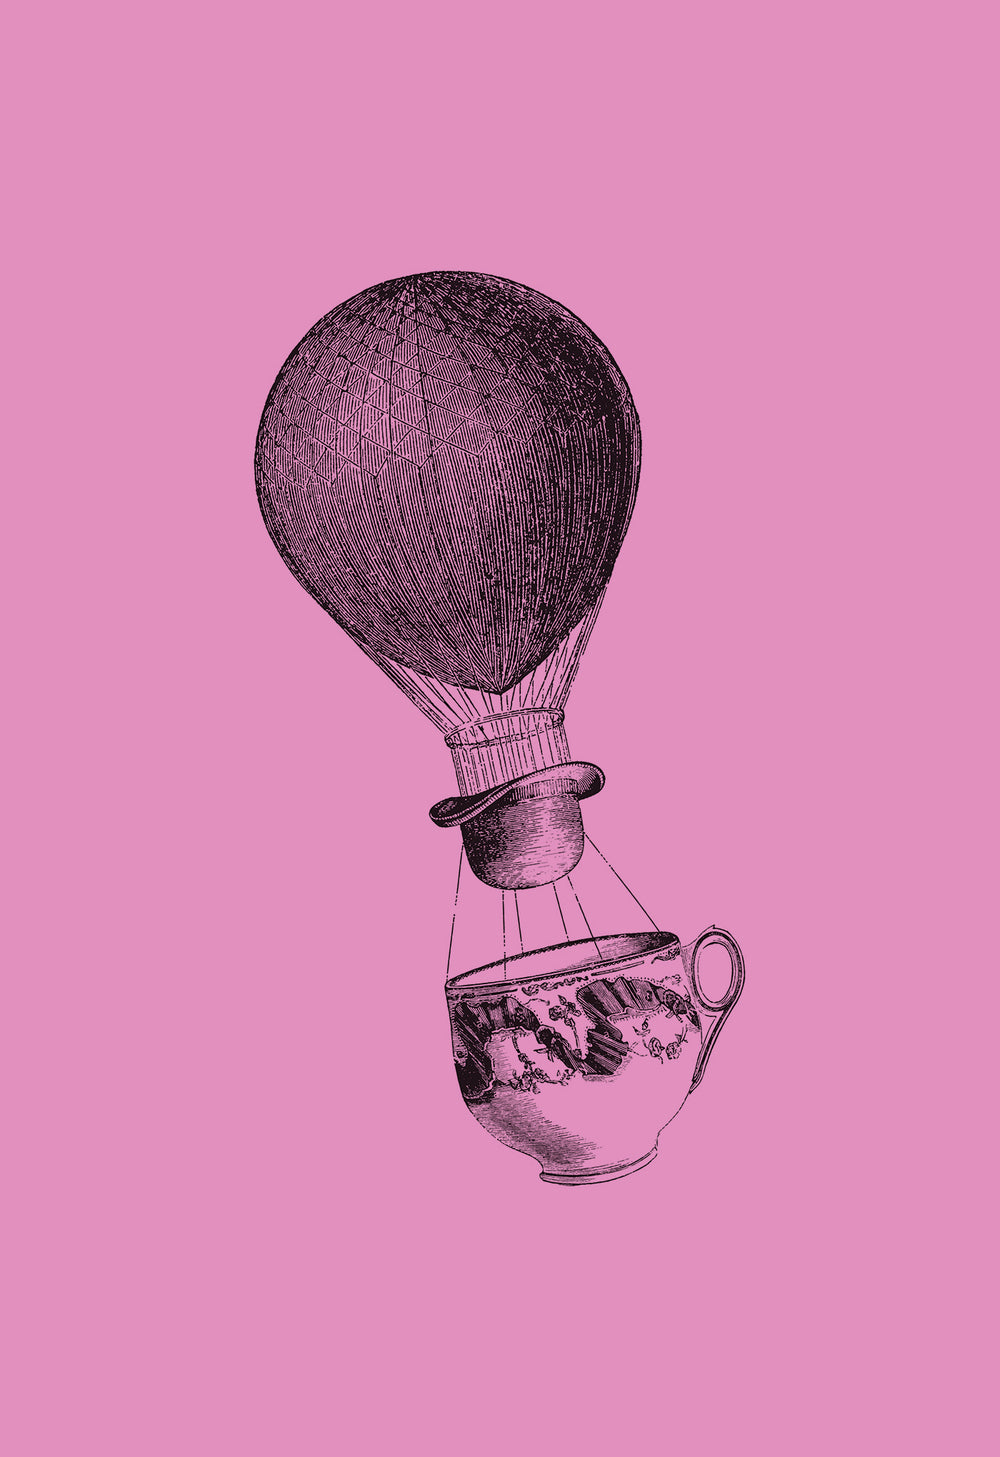 Detailed drawing of cup of tea being lifted by a hot air balloon on a pink background.